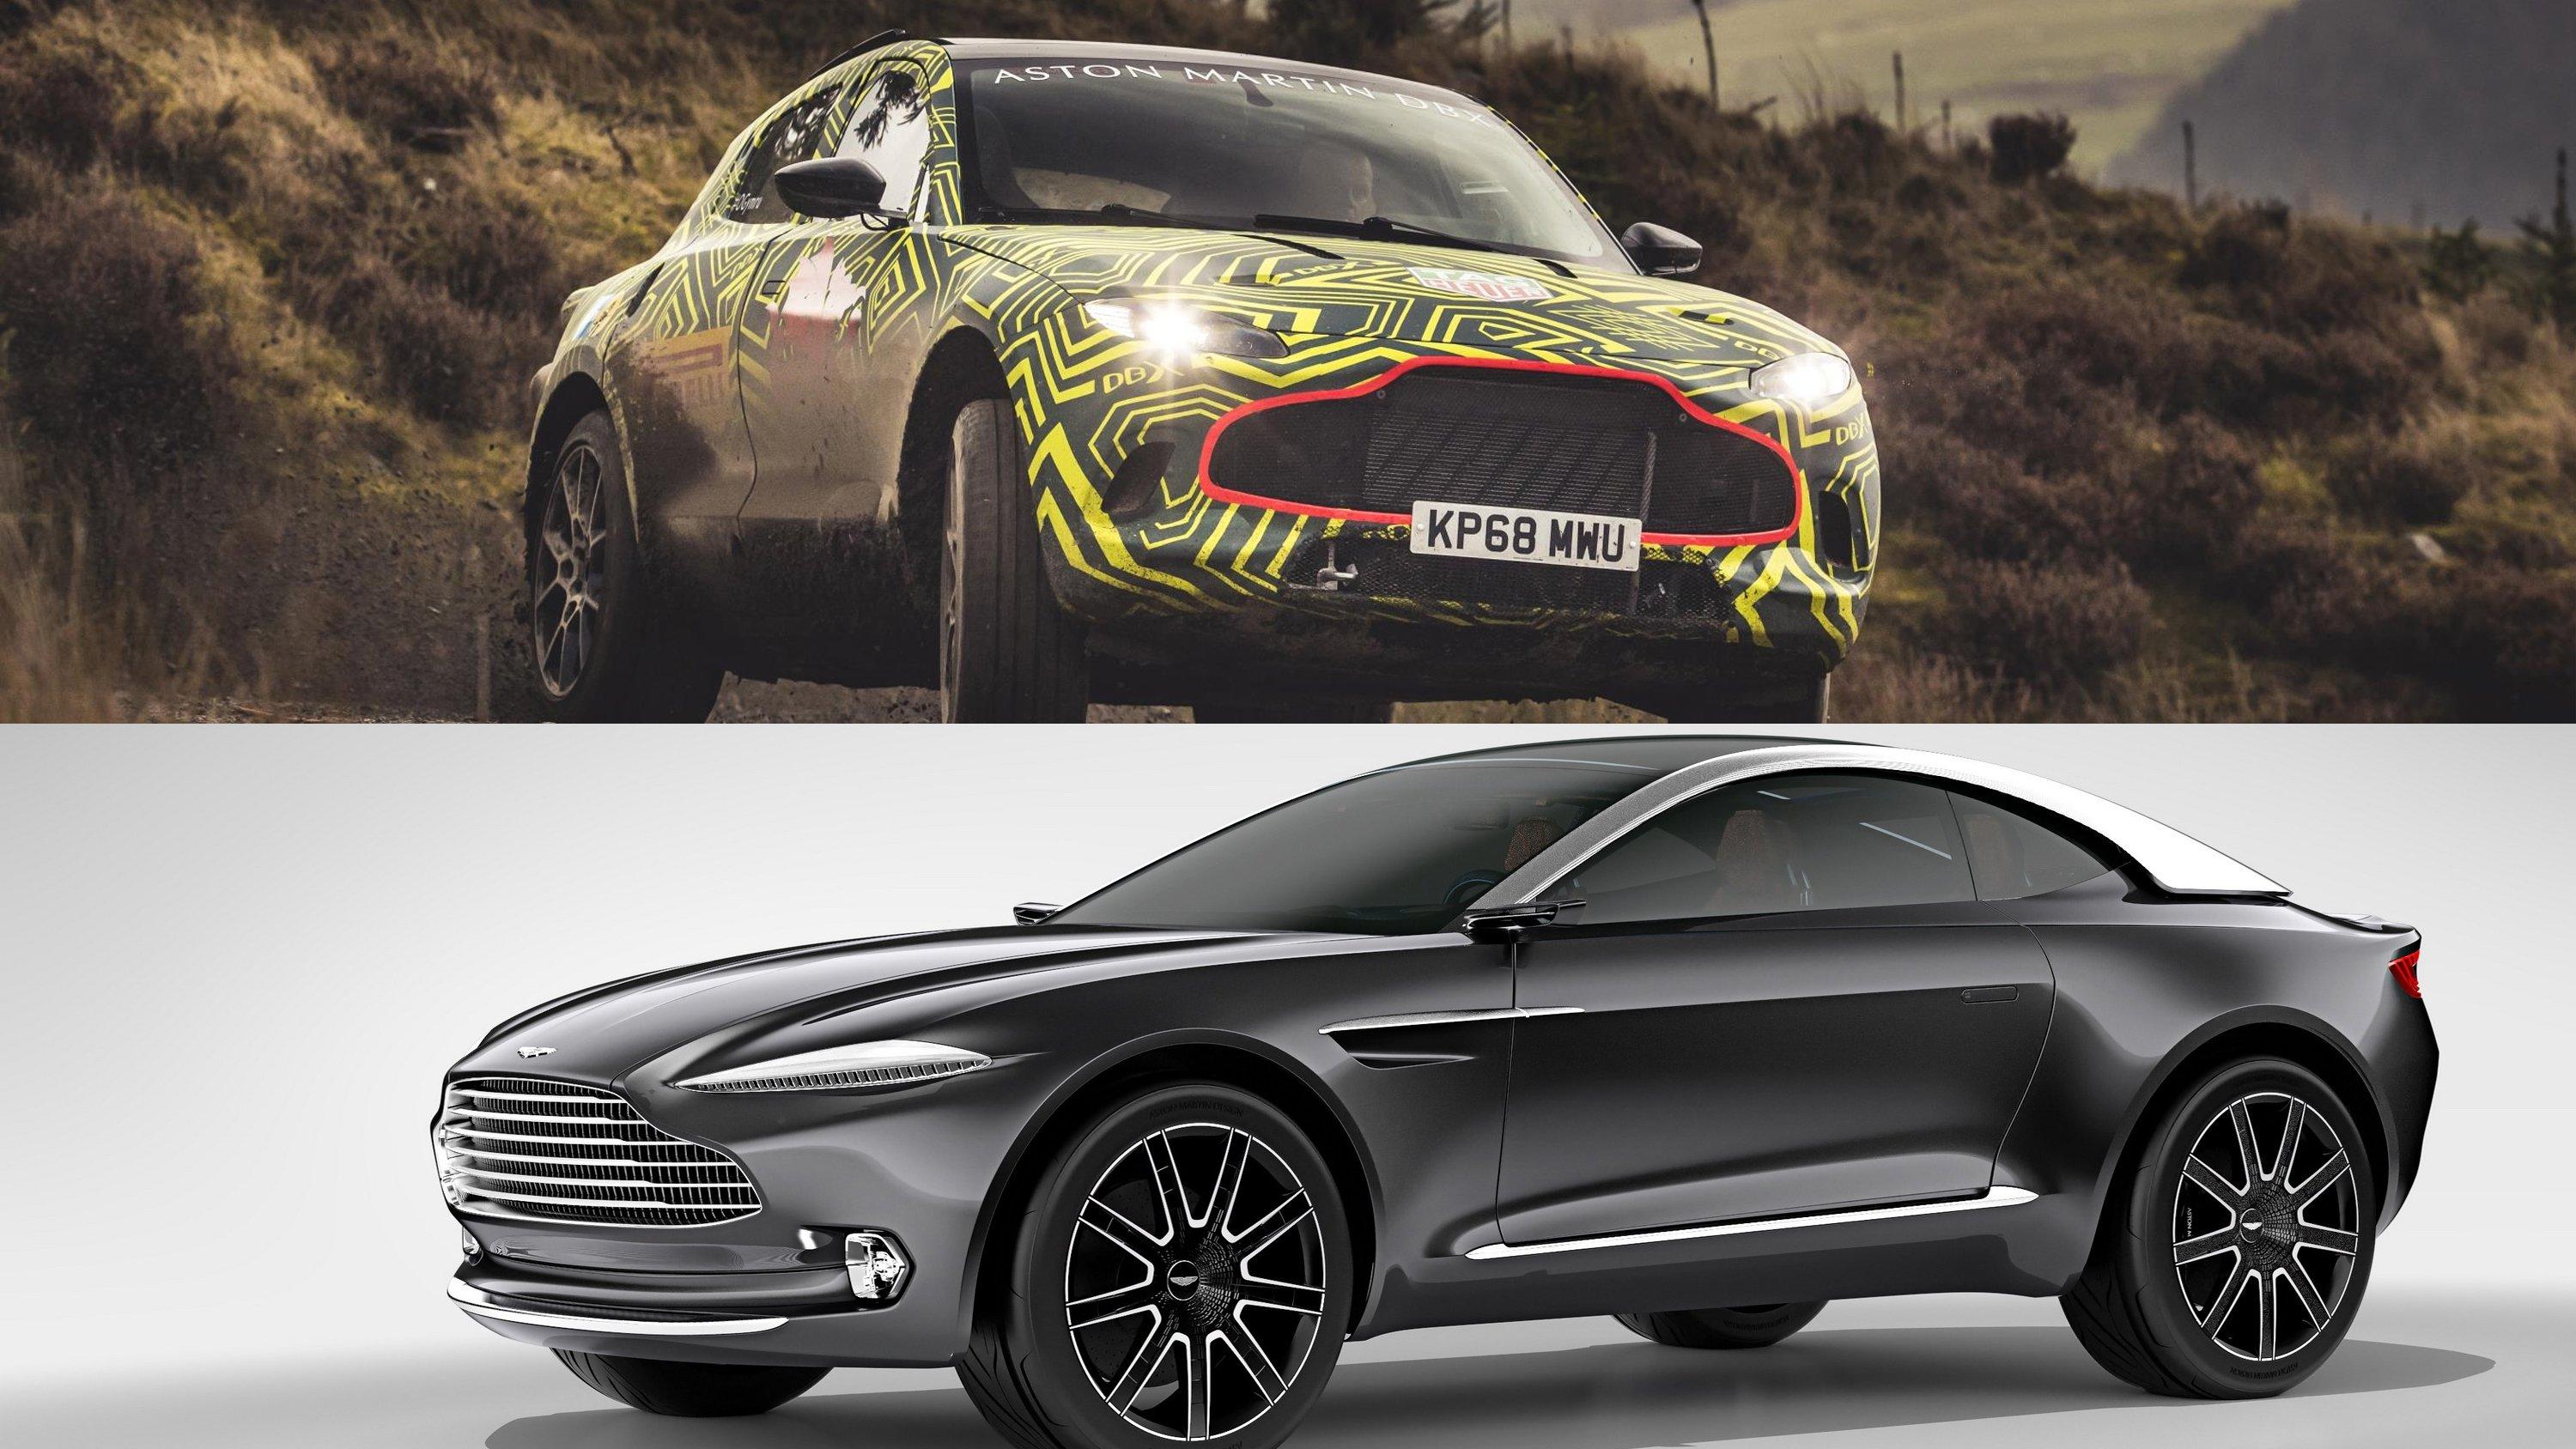 Visual Comparison Between The Aston Martin DBX Prototype And